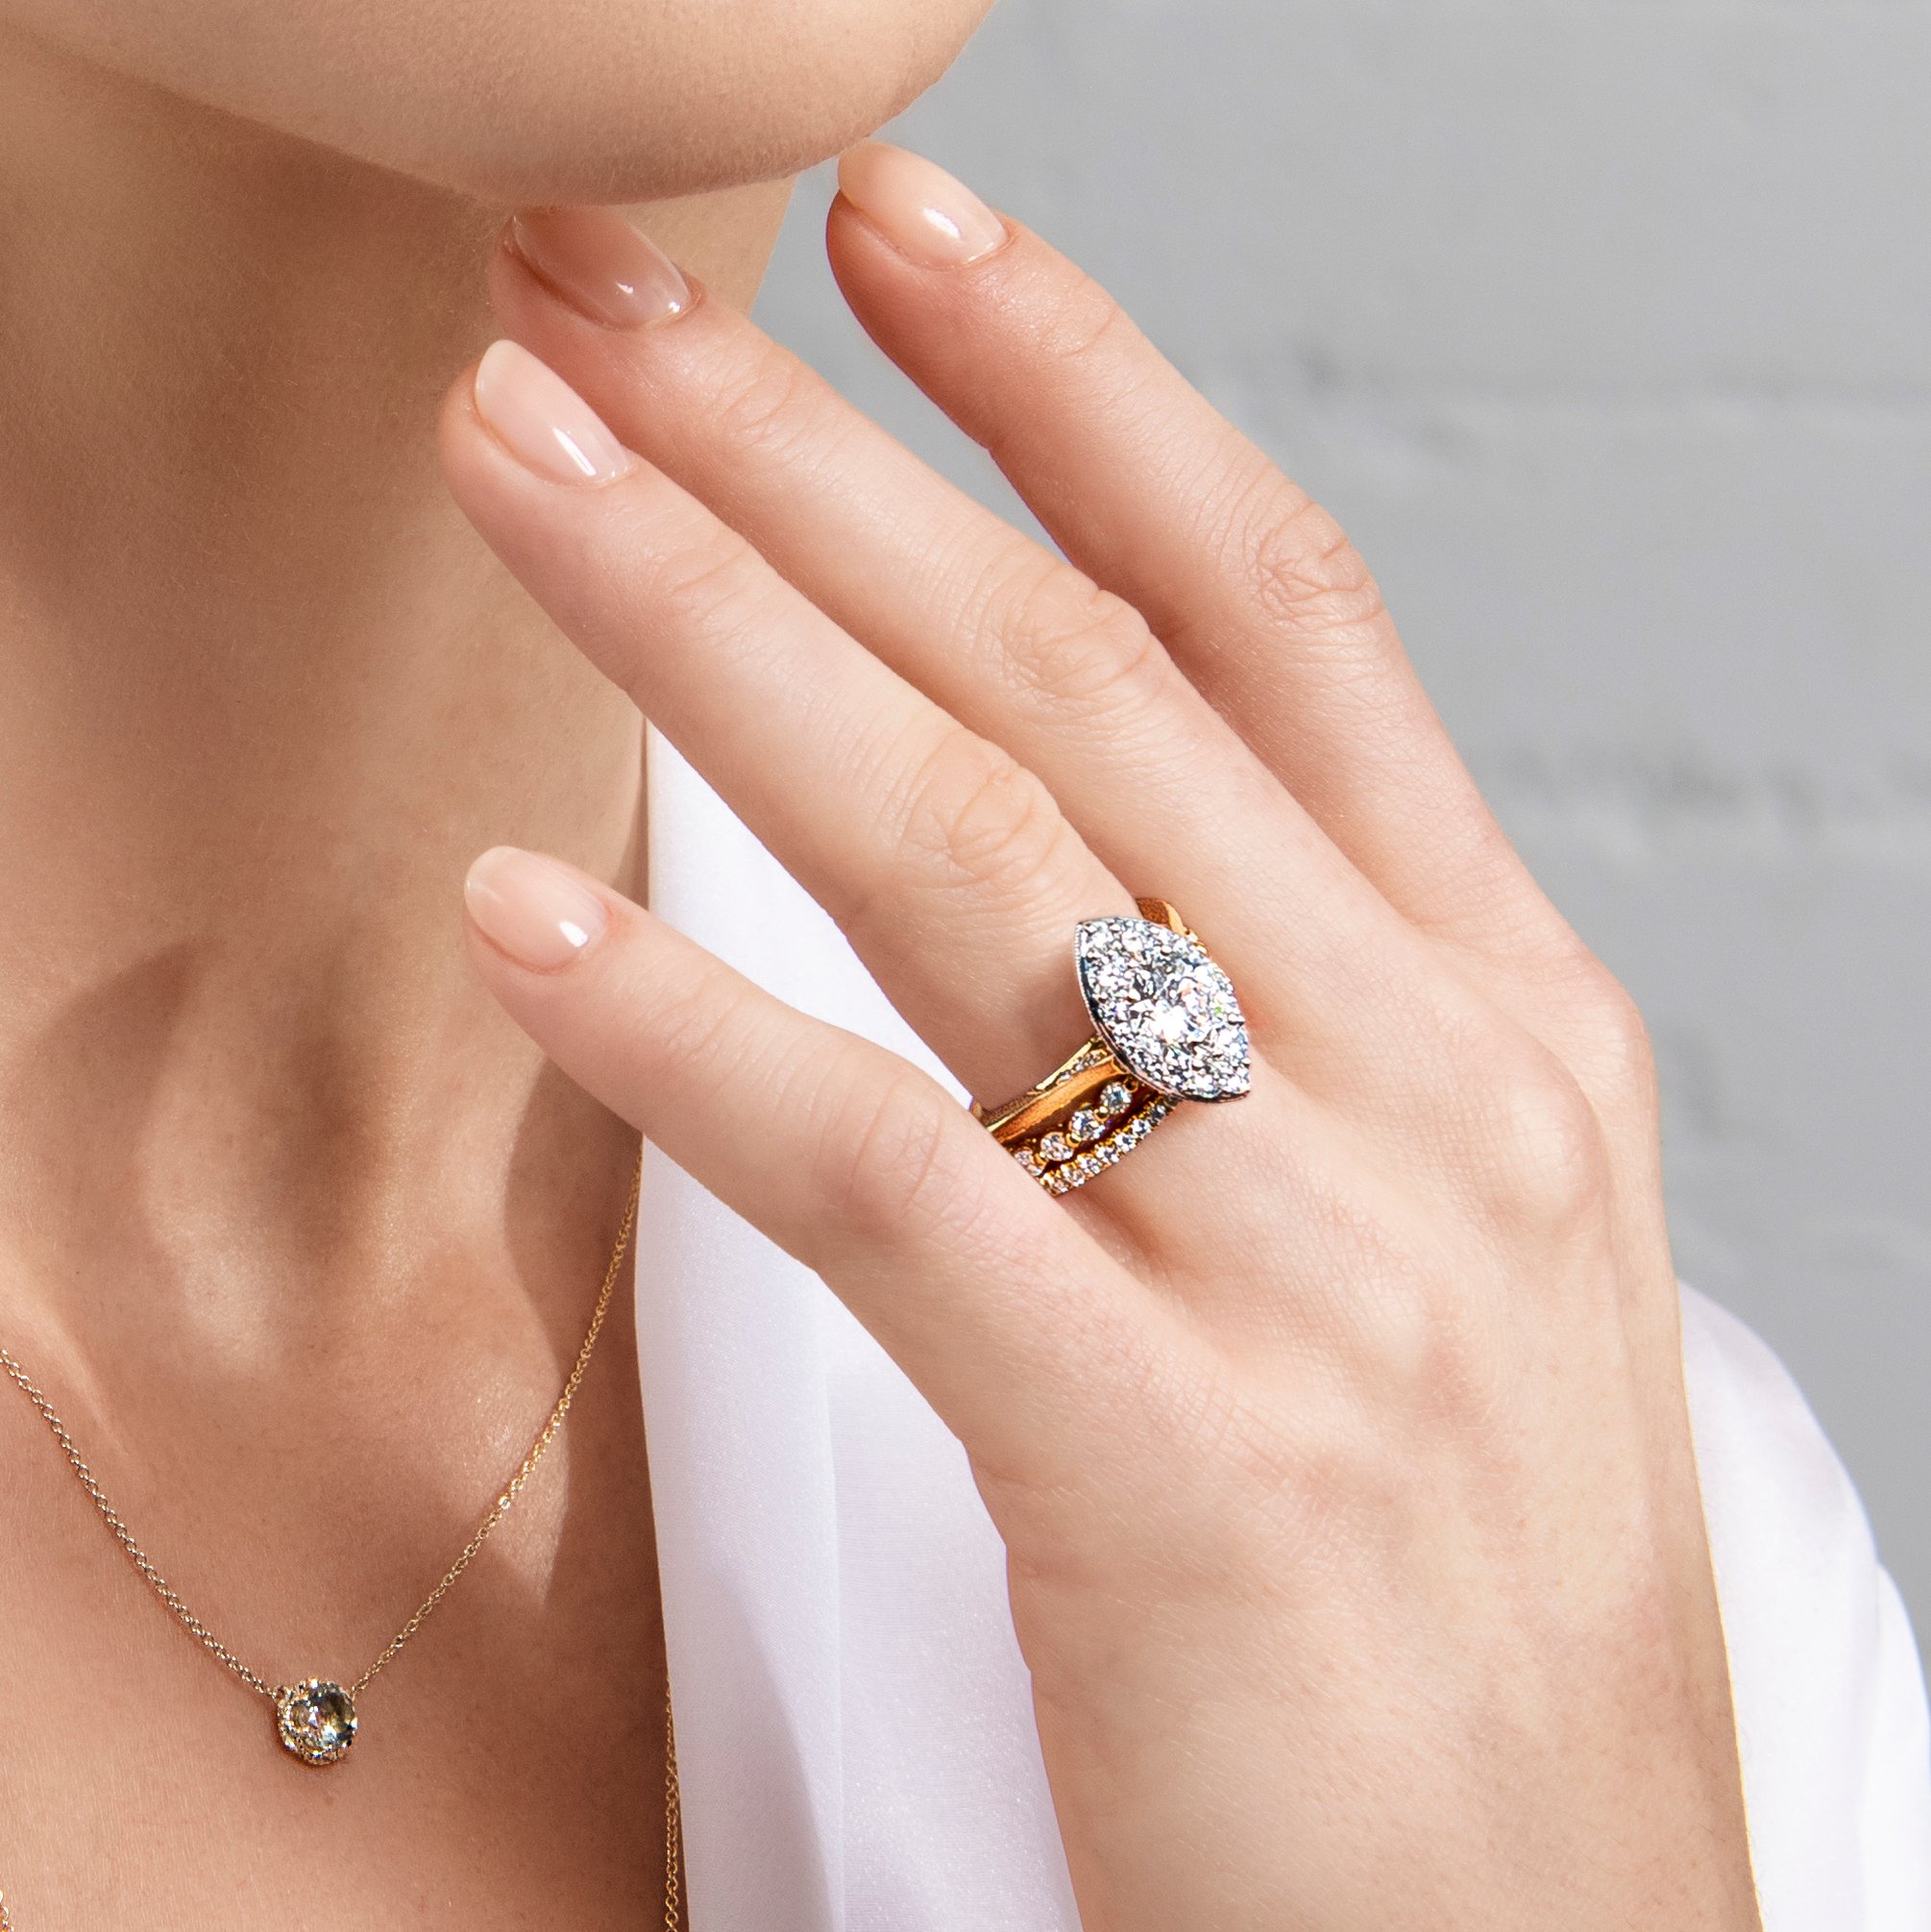 5 Hints for Taking an Effortless Engagement Ring Selfie